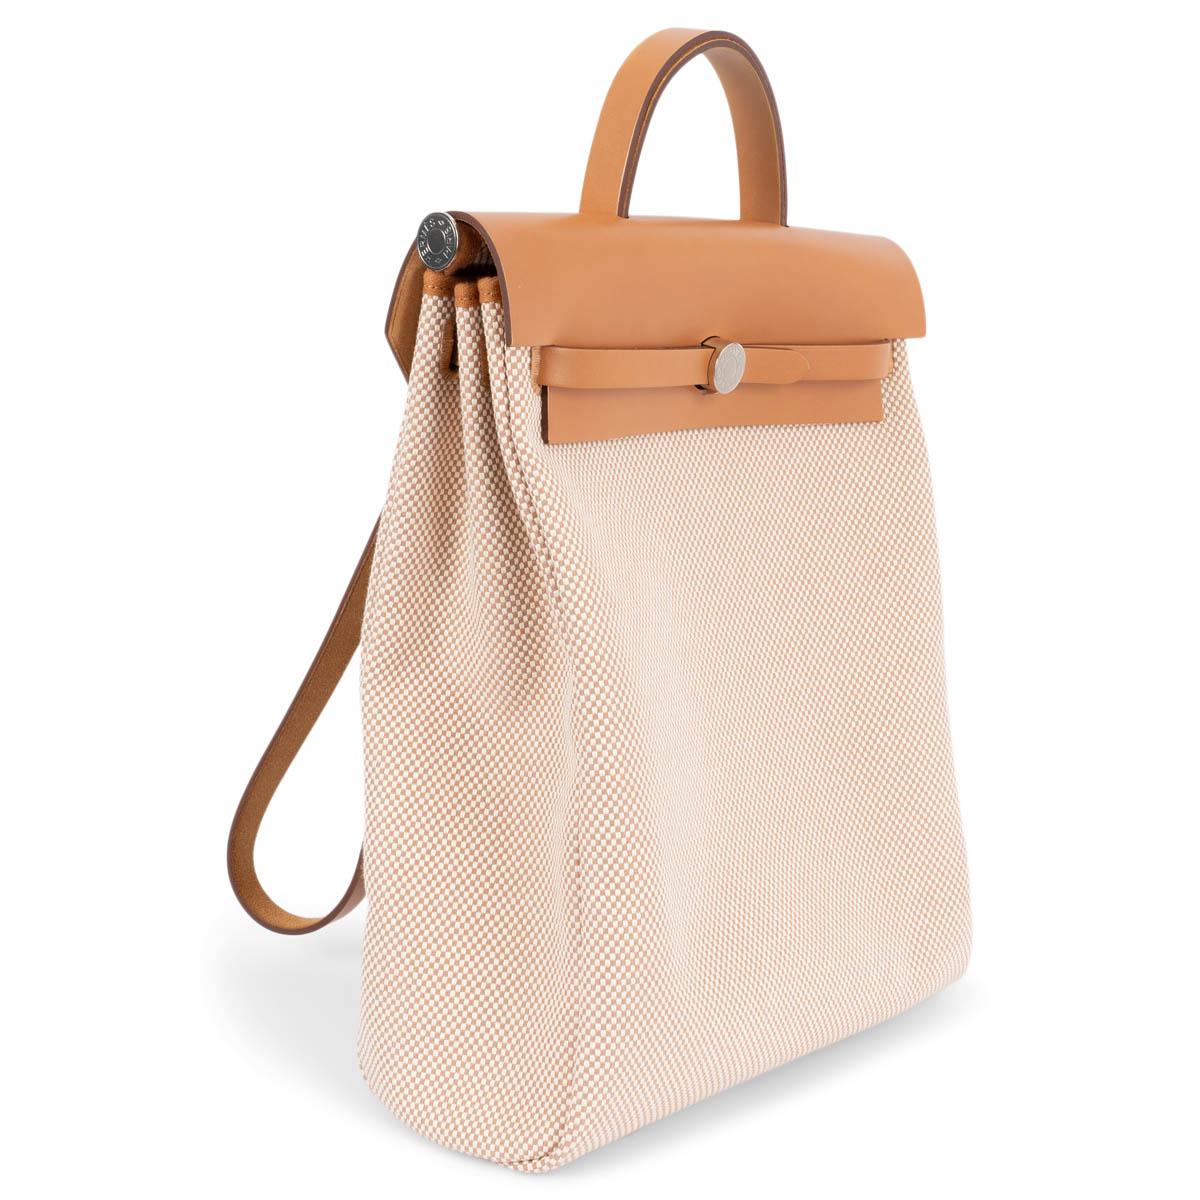 100% authentic Hermès Herbag a Dos Zip Retourne backpage in Naturel Vache Hunter leather and Ecru-Beige Toile Criss Viking canvas. Features a zip pocket on the outside back, palladium plated hardware and a leather top handle and straps. Closes with